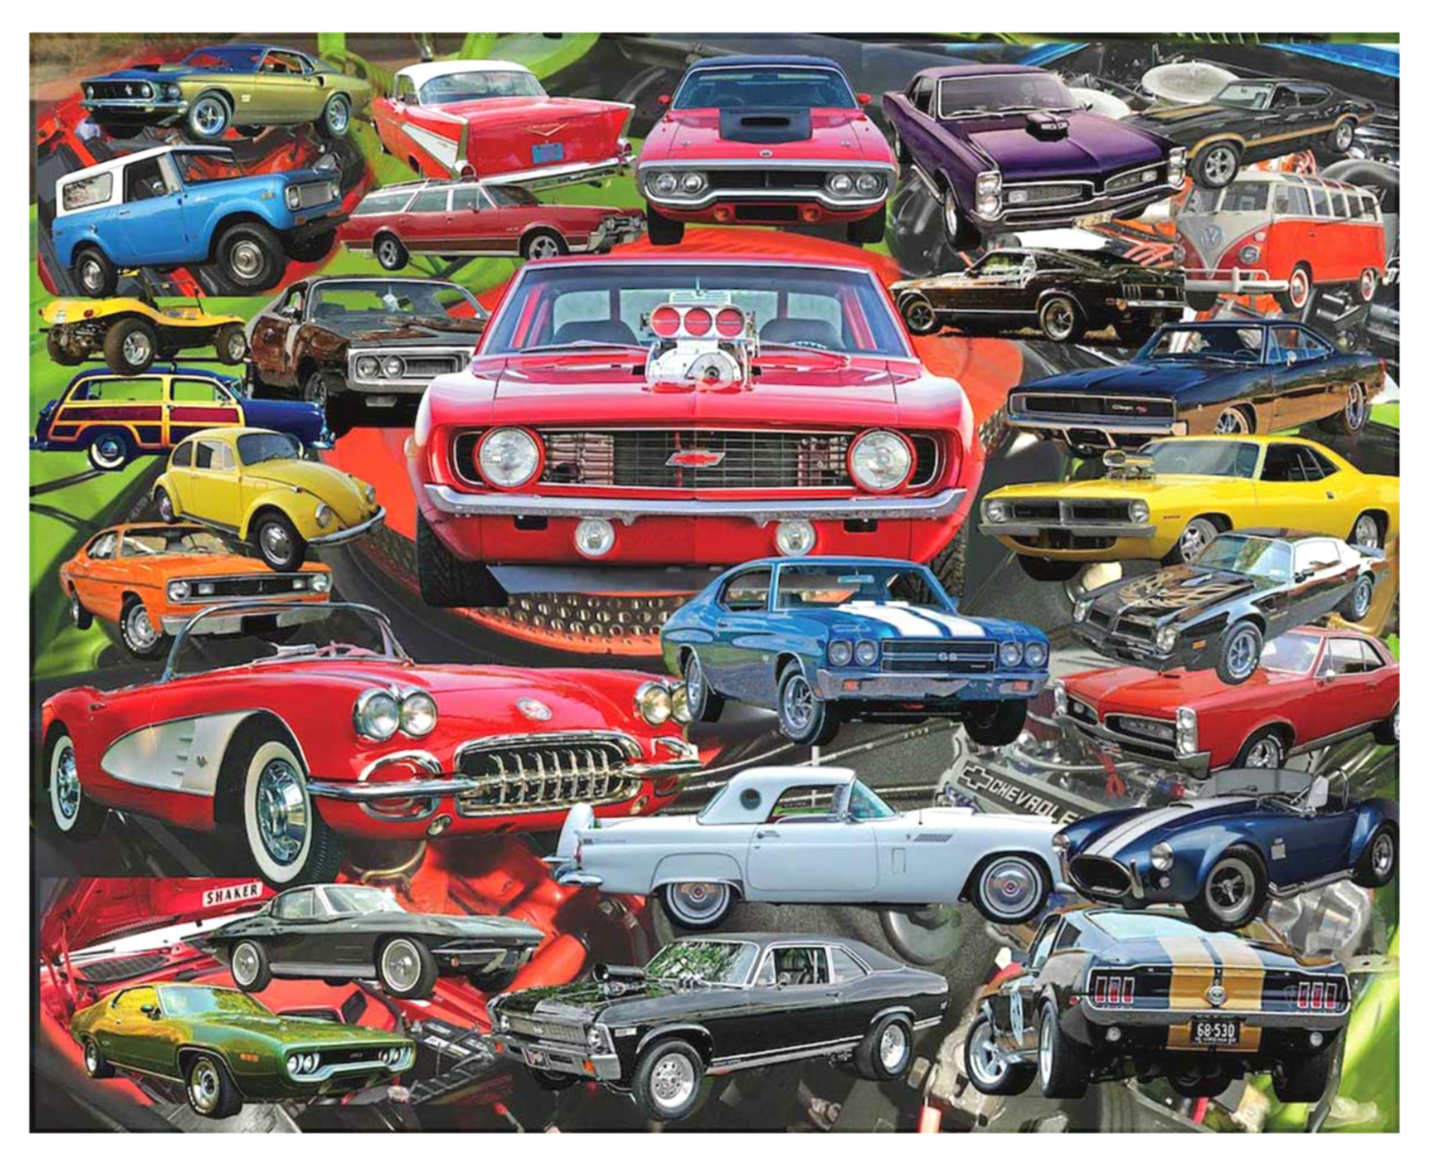 180 Cars collage